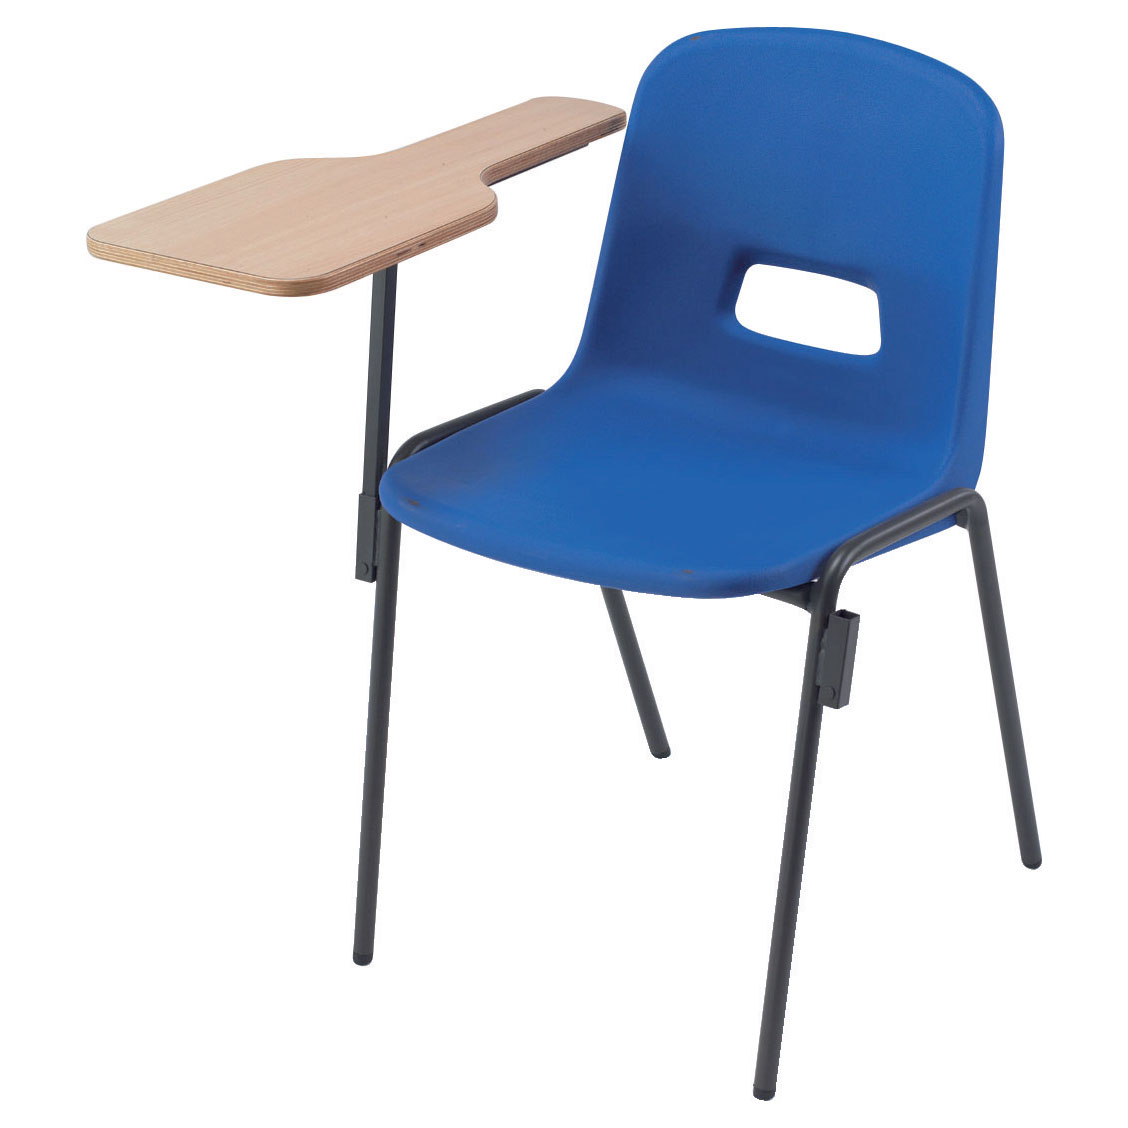 Remploy GH20 Classic School Chair + Writing Tablet